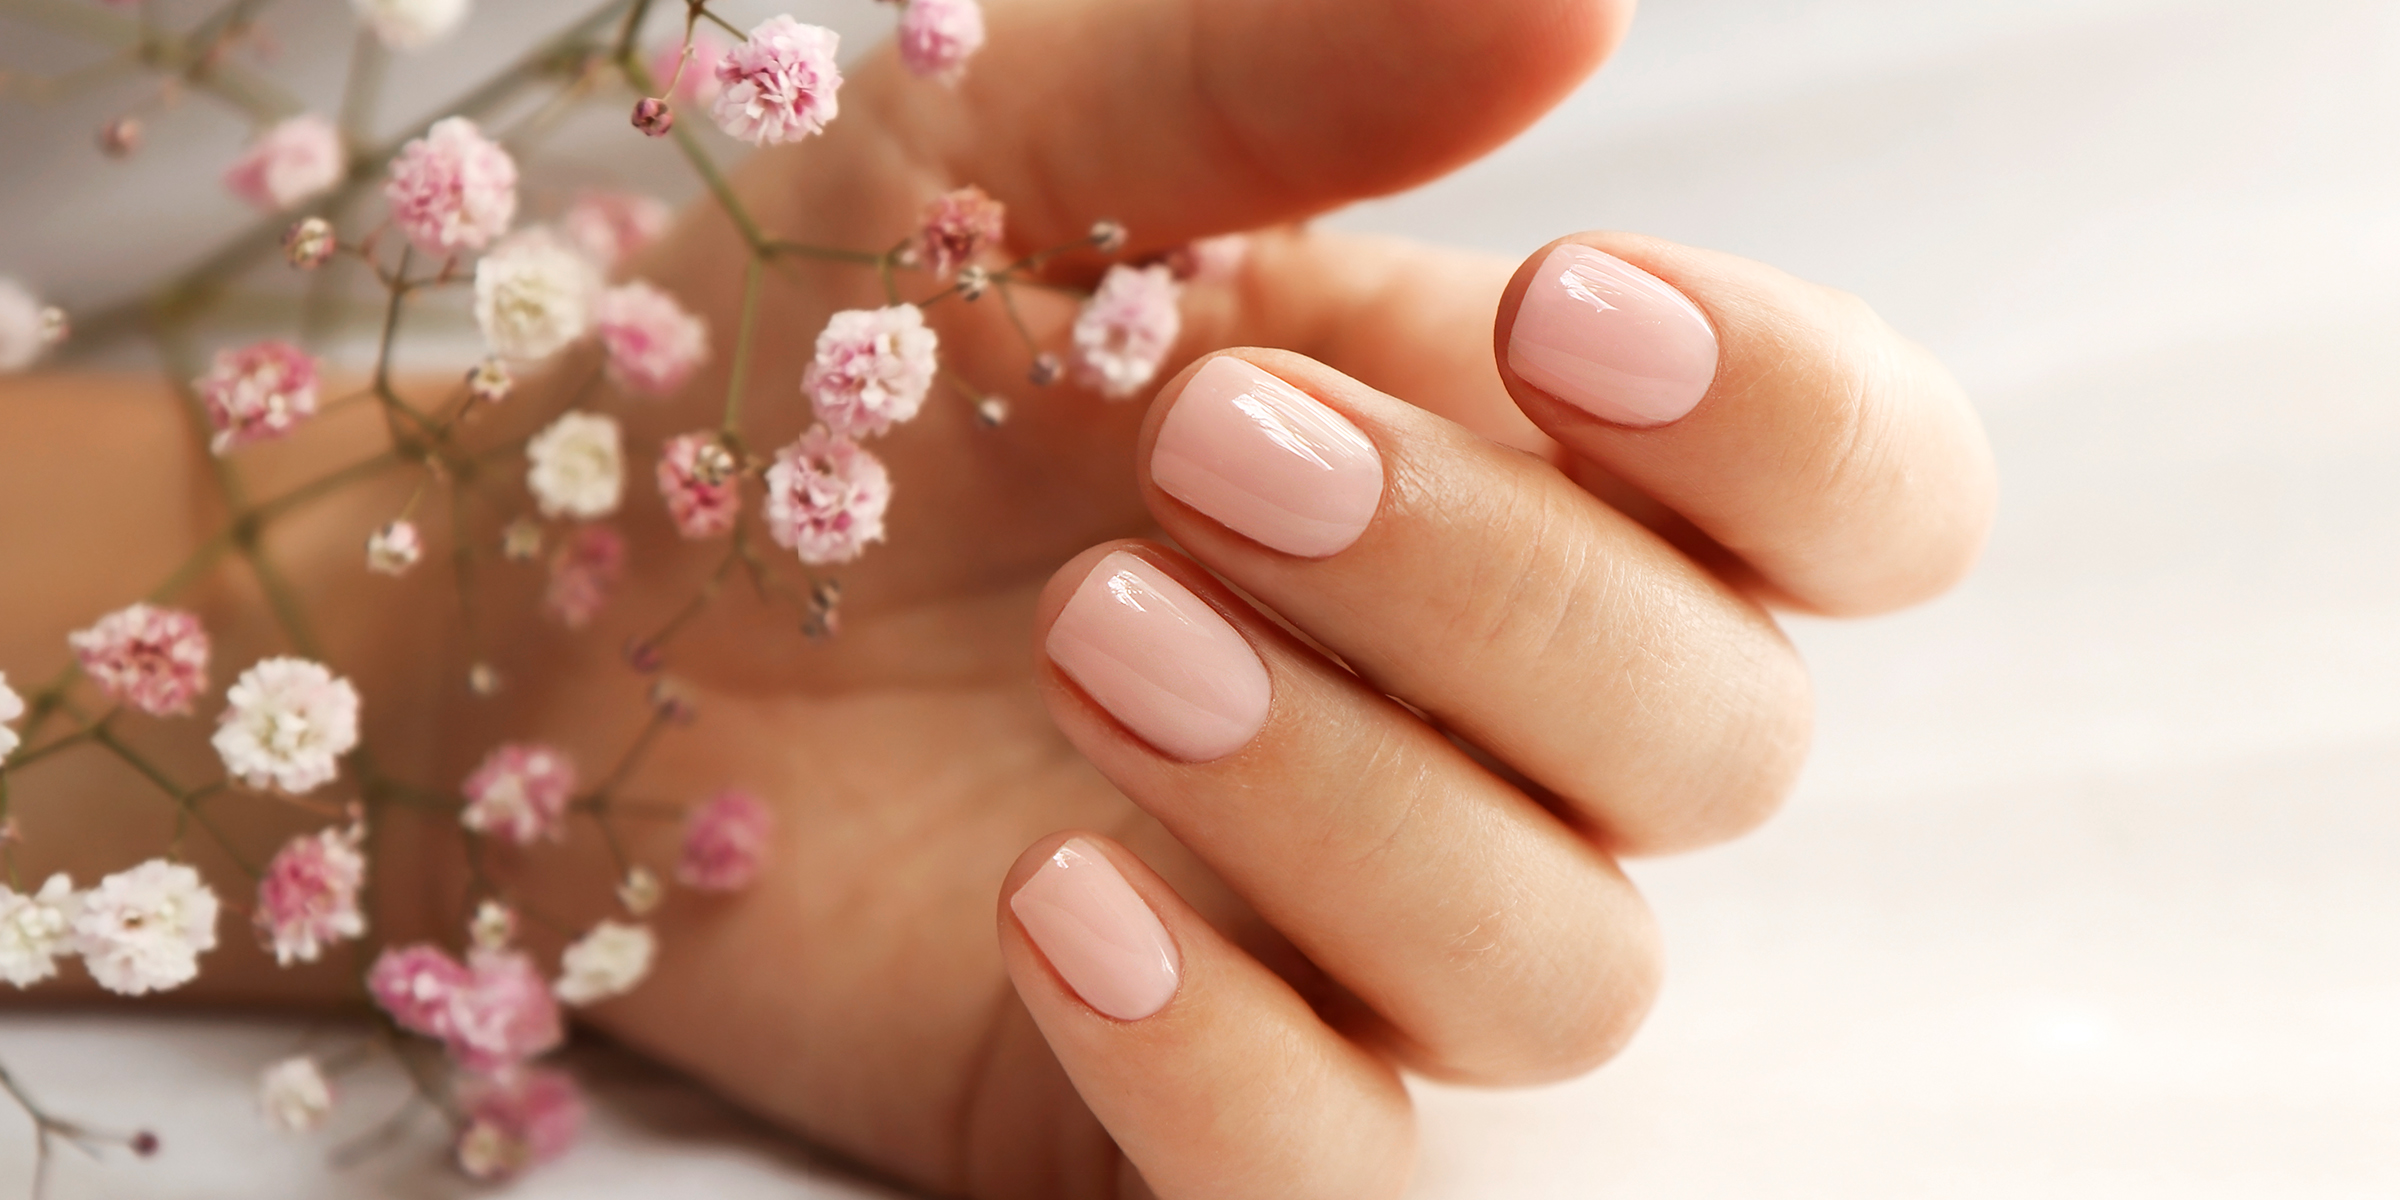 Short, pink nails | Source: Getty Images